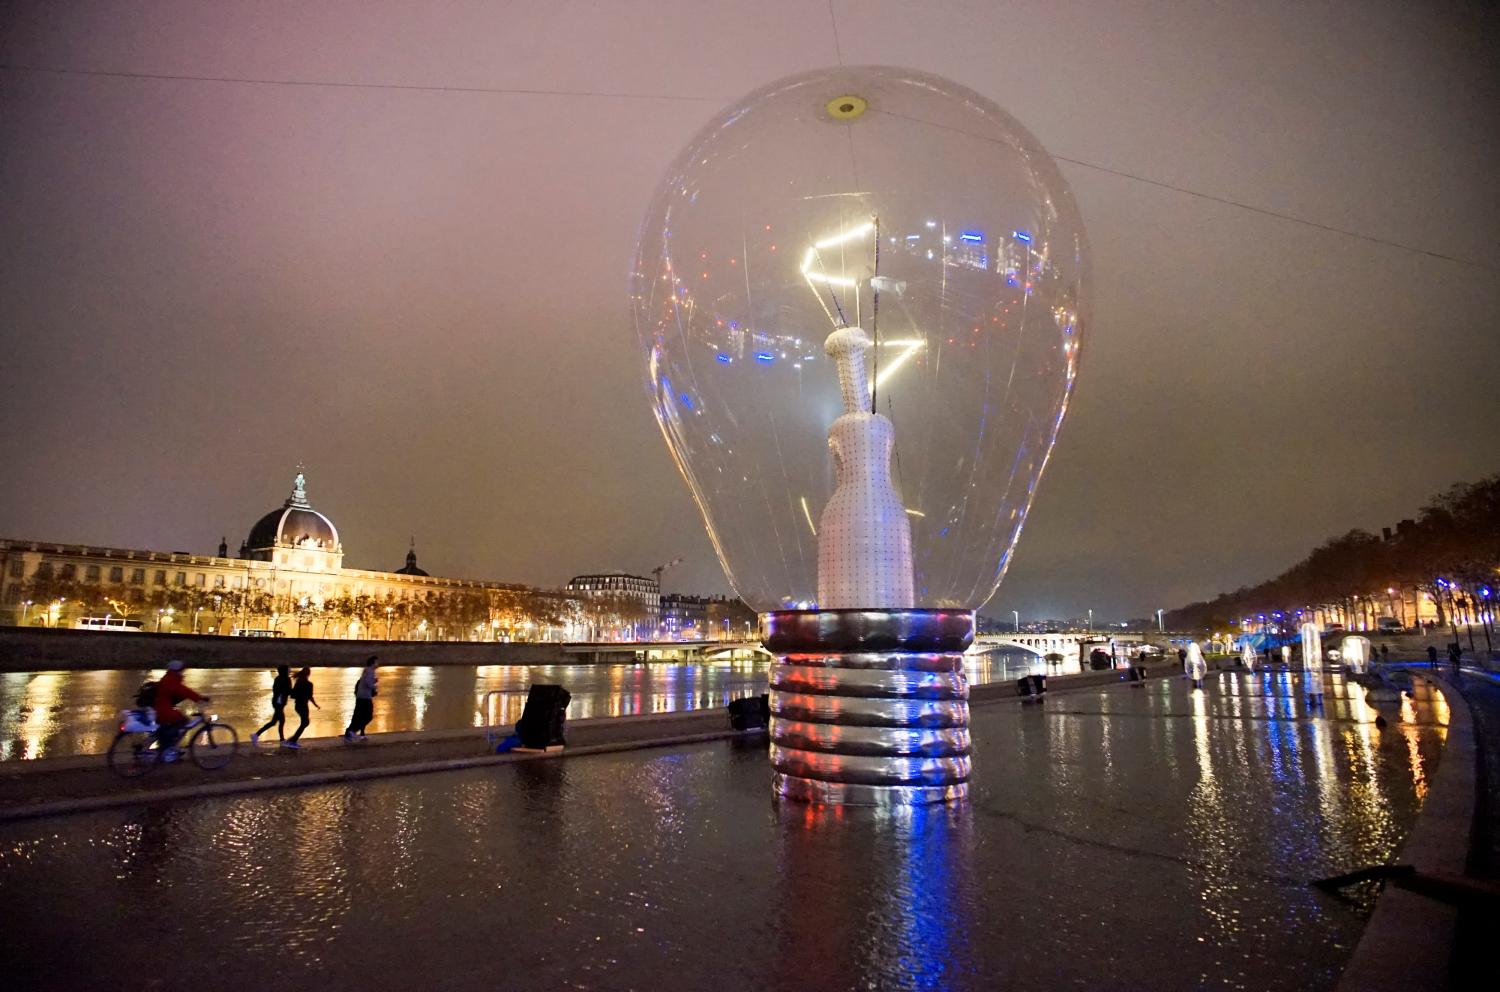 View of a giant incandescent light bulb as part of the Incandescence installation by artist Severine Fontaine during the rehearsal for the Festival of Lights in central Lyon